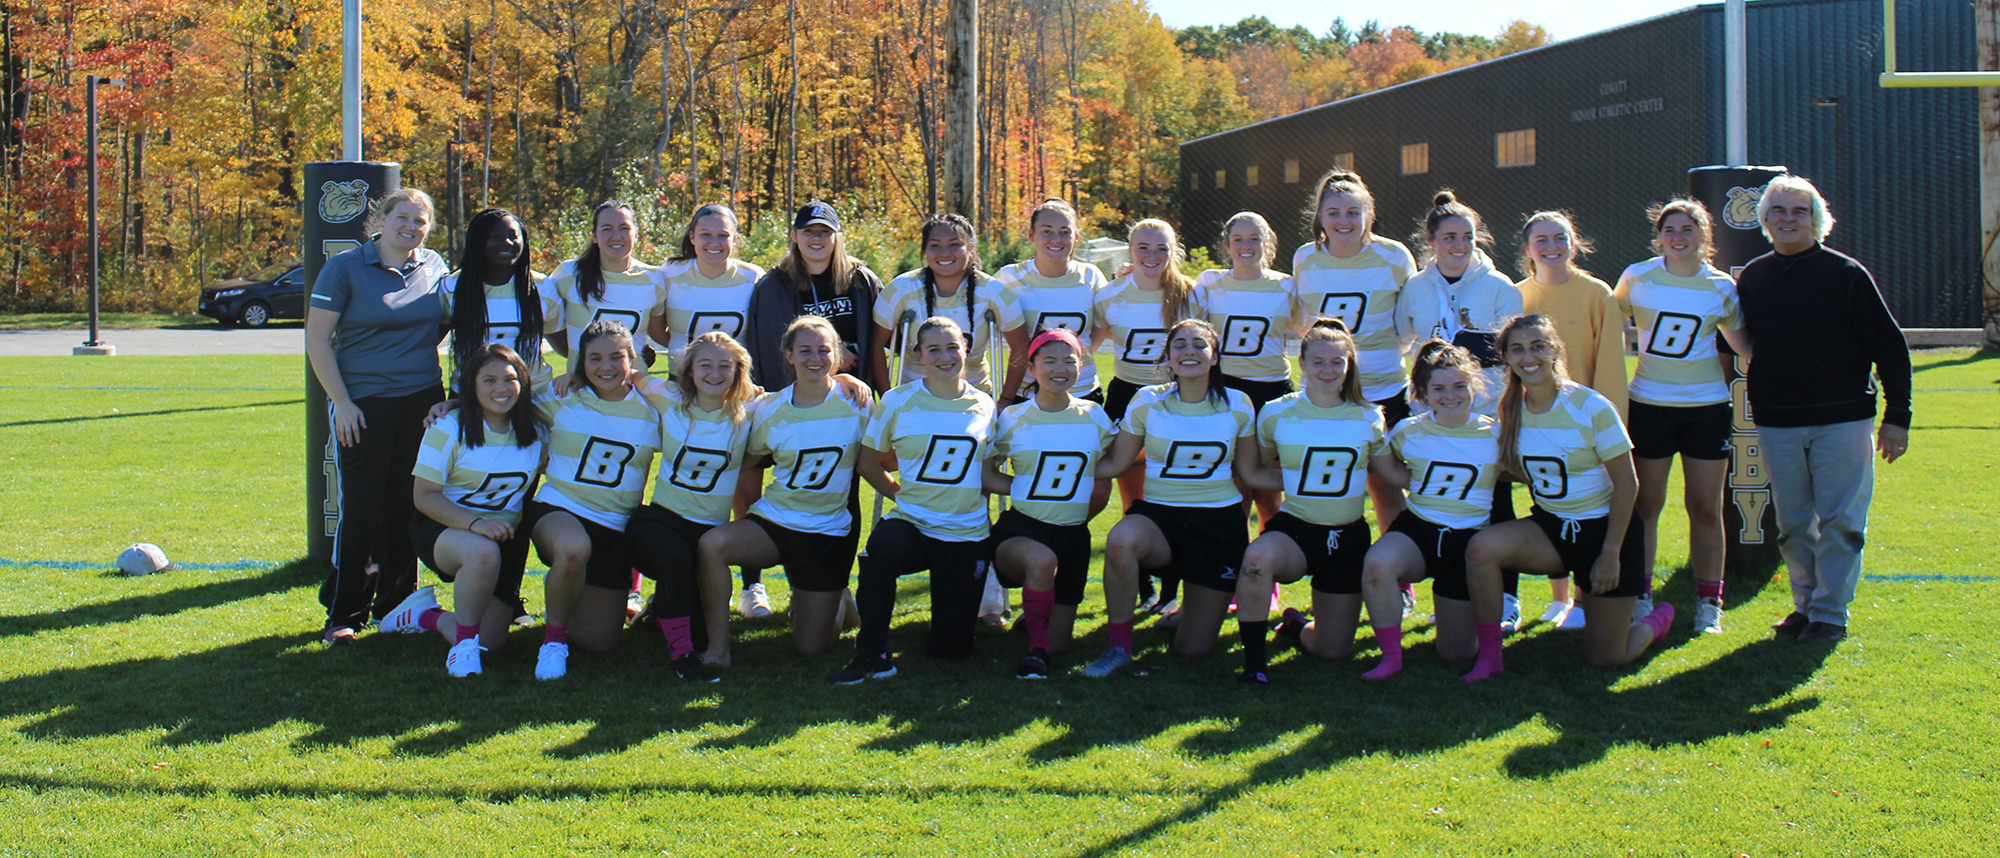 IT’S A THREE-PEAT: WOMEN'S RUGBY CAPTURES 3rd STRAIGHT RUGBY NORTHEAST CONFERENCE CHAMPIONSHIP